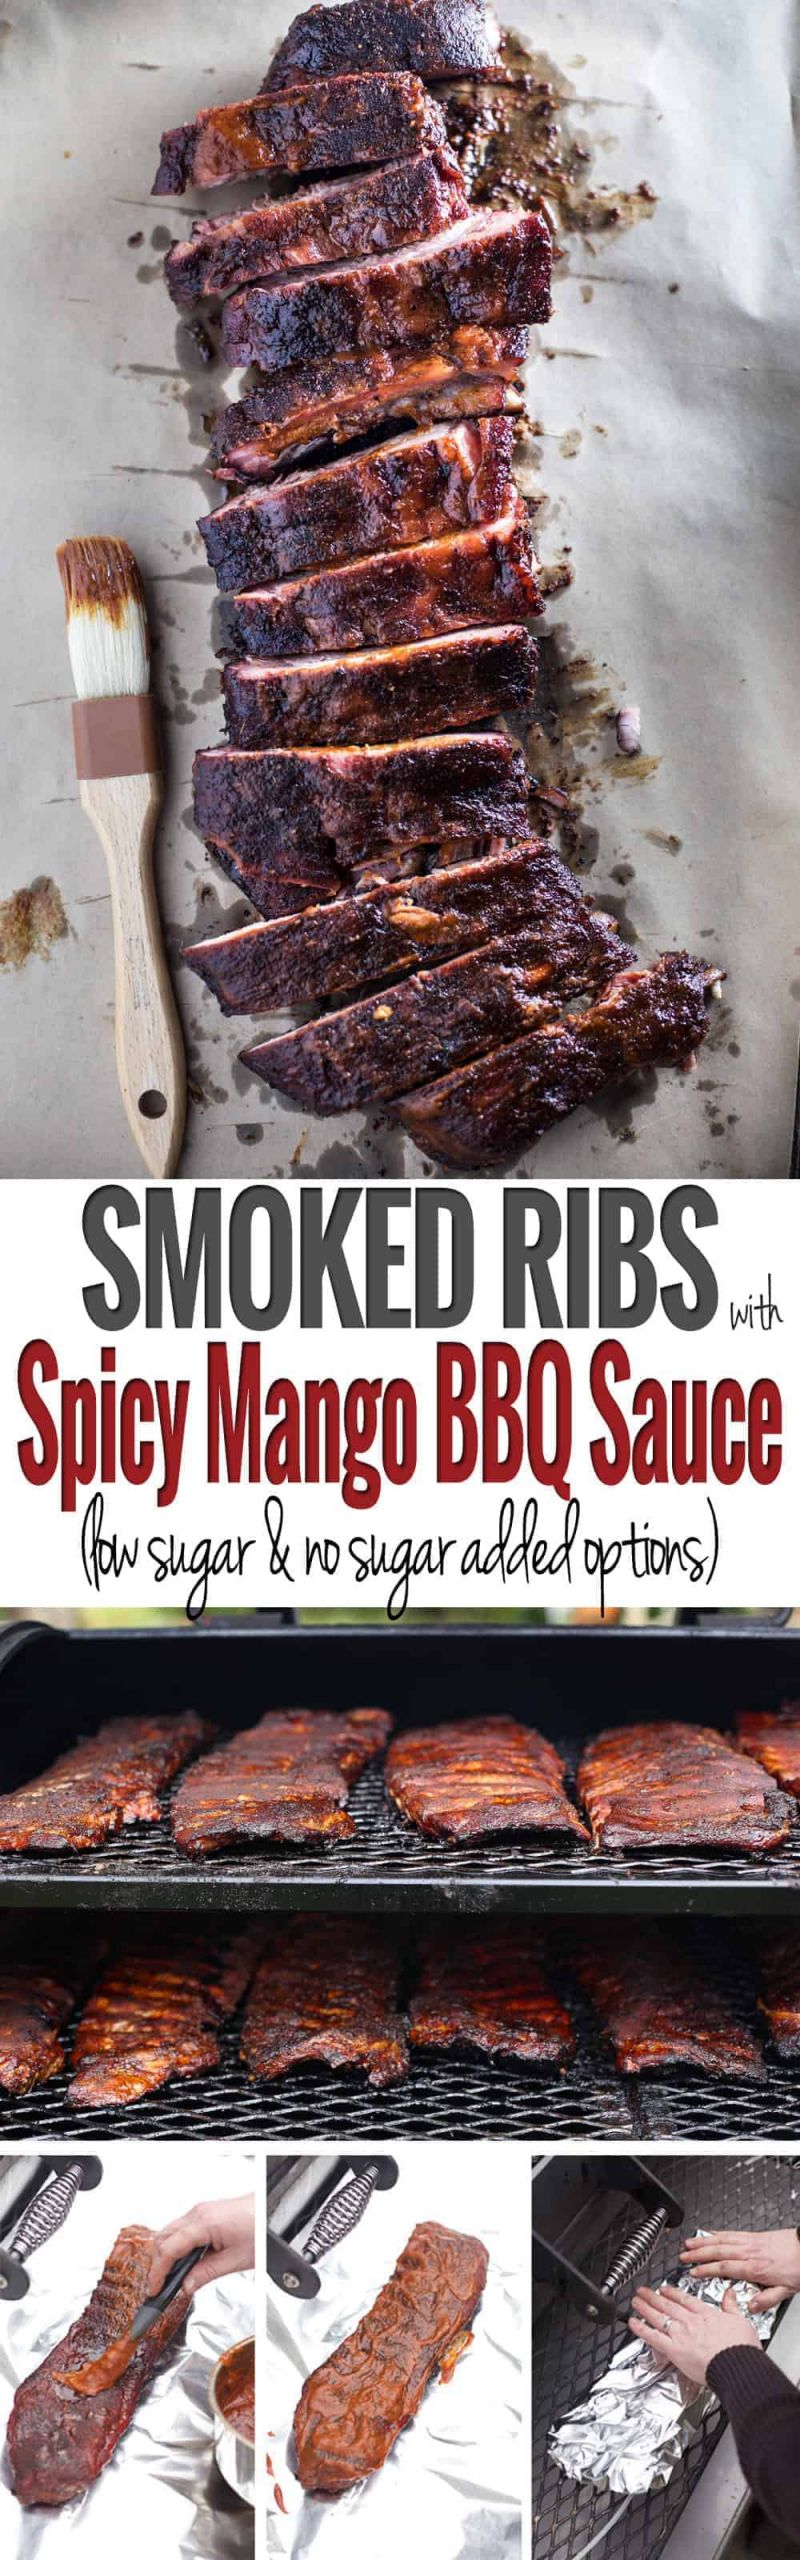 Bbq Sauce Without Sugar
 Smoked Ribs with Spicy Mango BBQ Sauce low sugar Vindulge